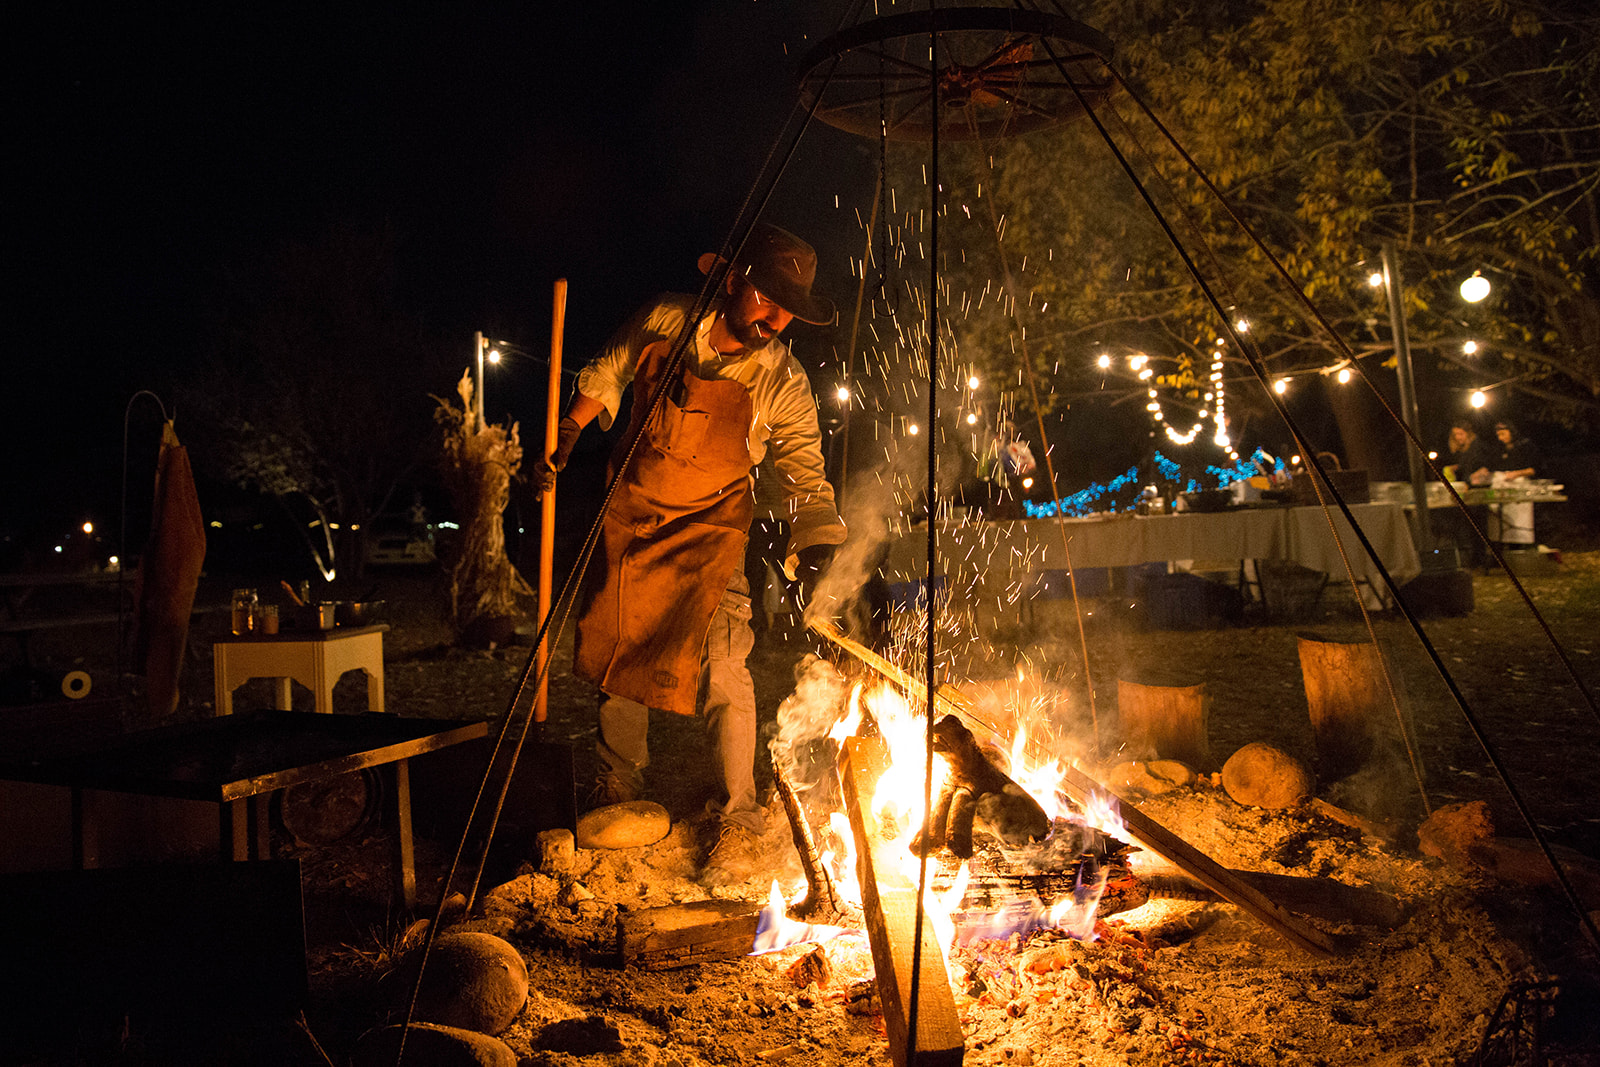 Chef Juan Andres tending a fire at night during an outdoor dinner event - John Robson Photography